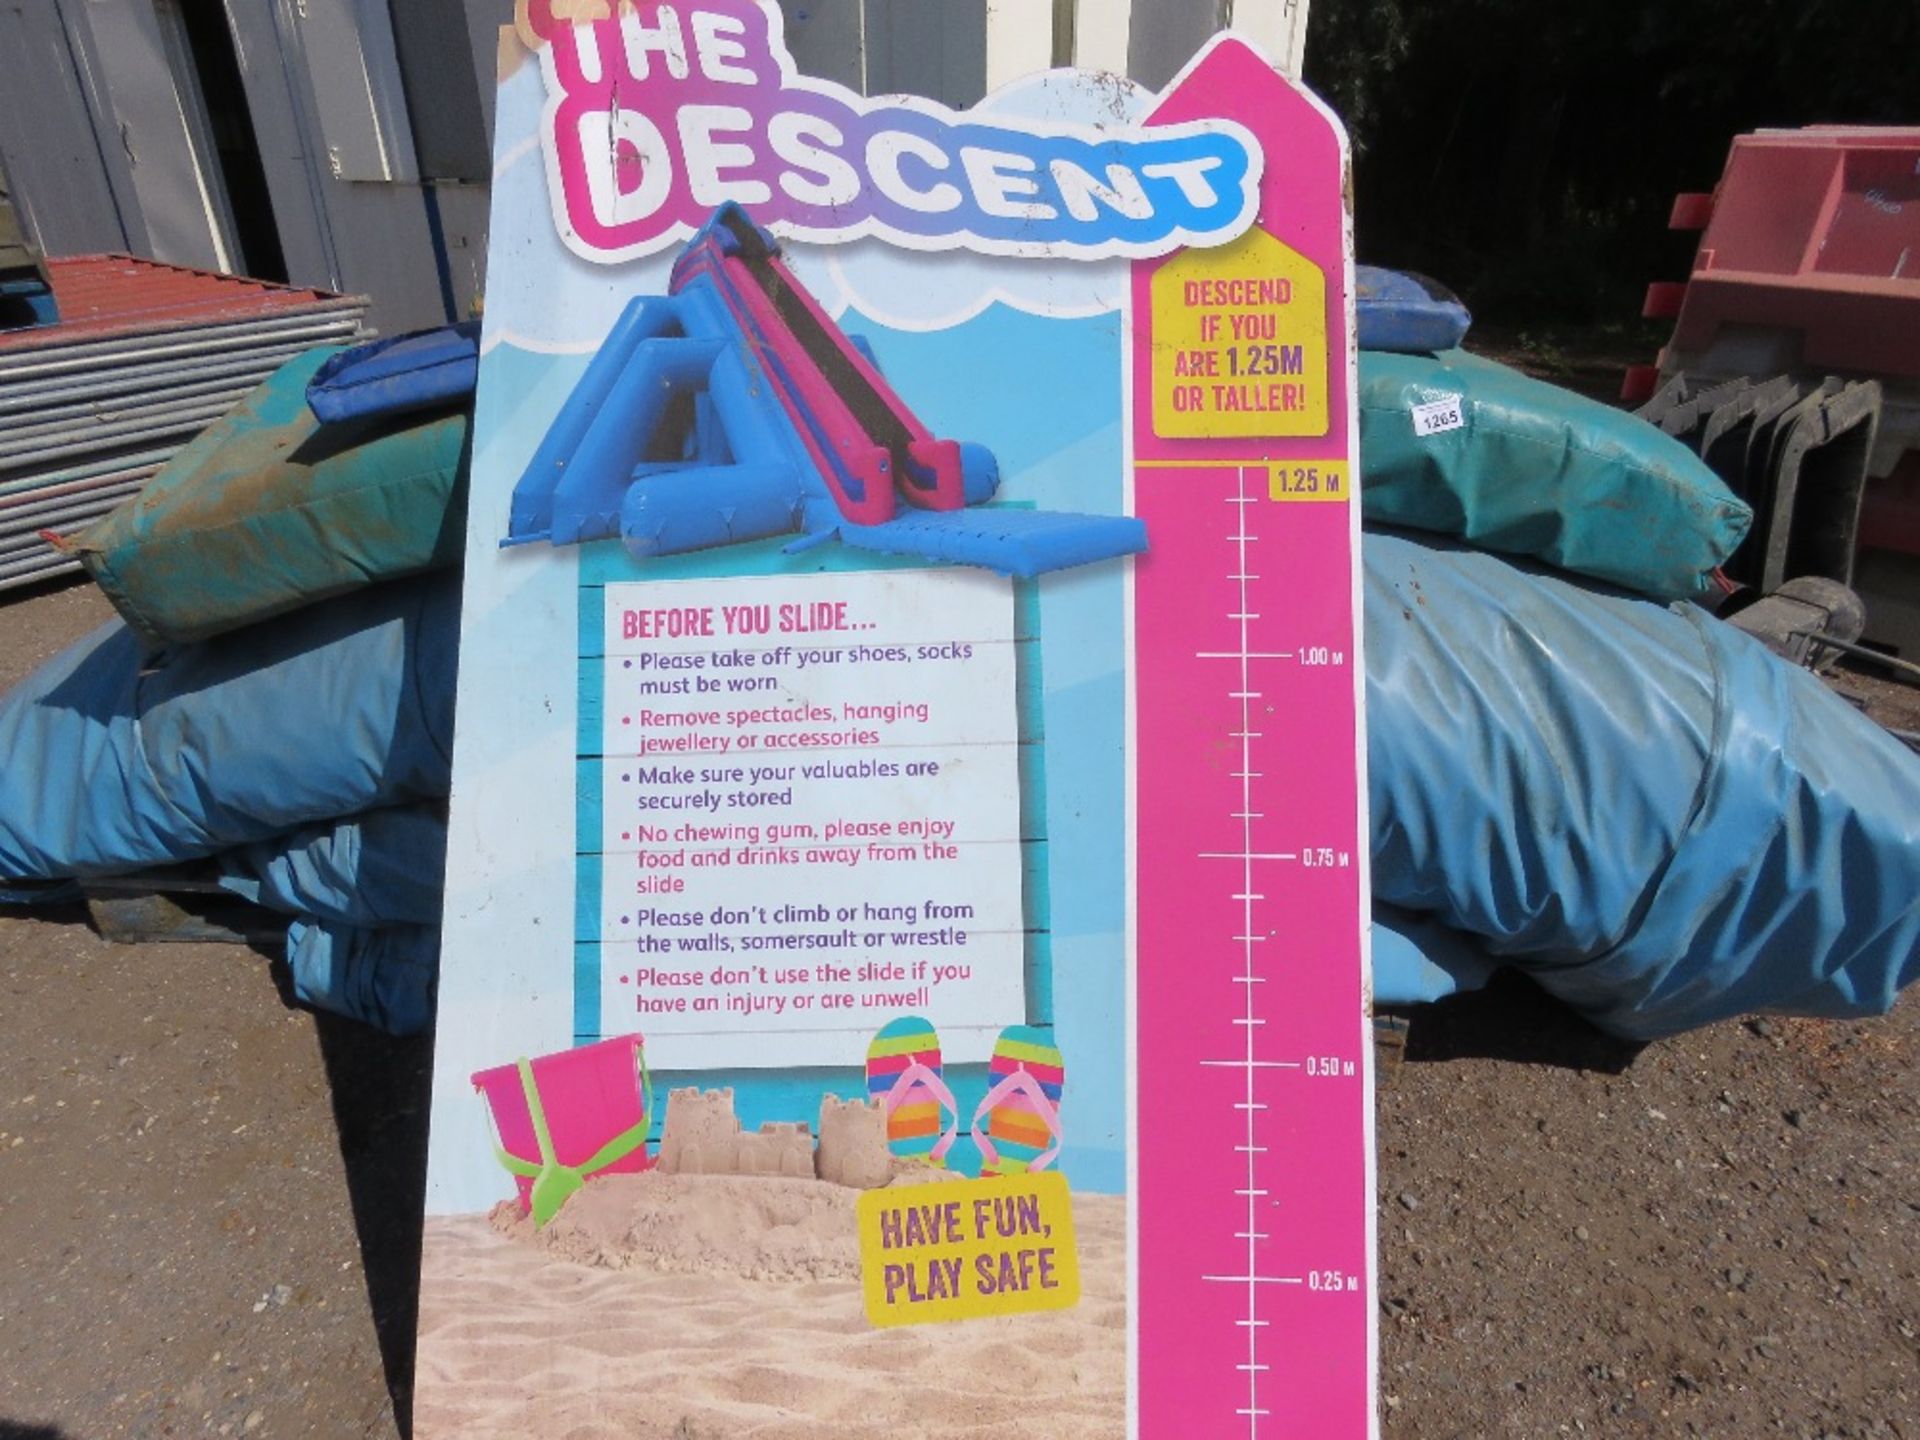 MEGA DESCENT INFLATABLE SLIDE . INCLUDES BLOWER. SOURCED FROM COUNCIL PROJECT. BELIEVED PURCHASED NE - Image 2 of 8